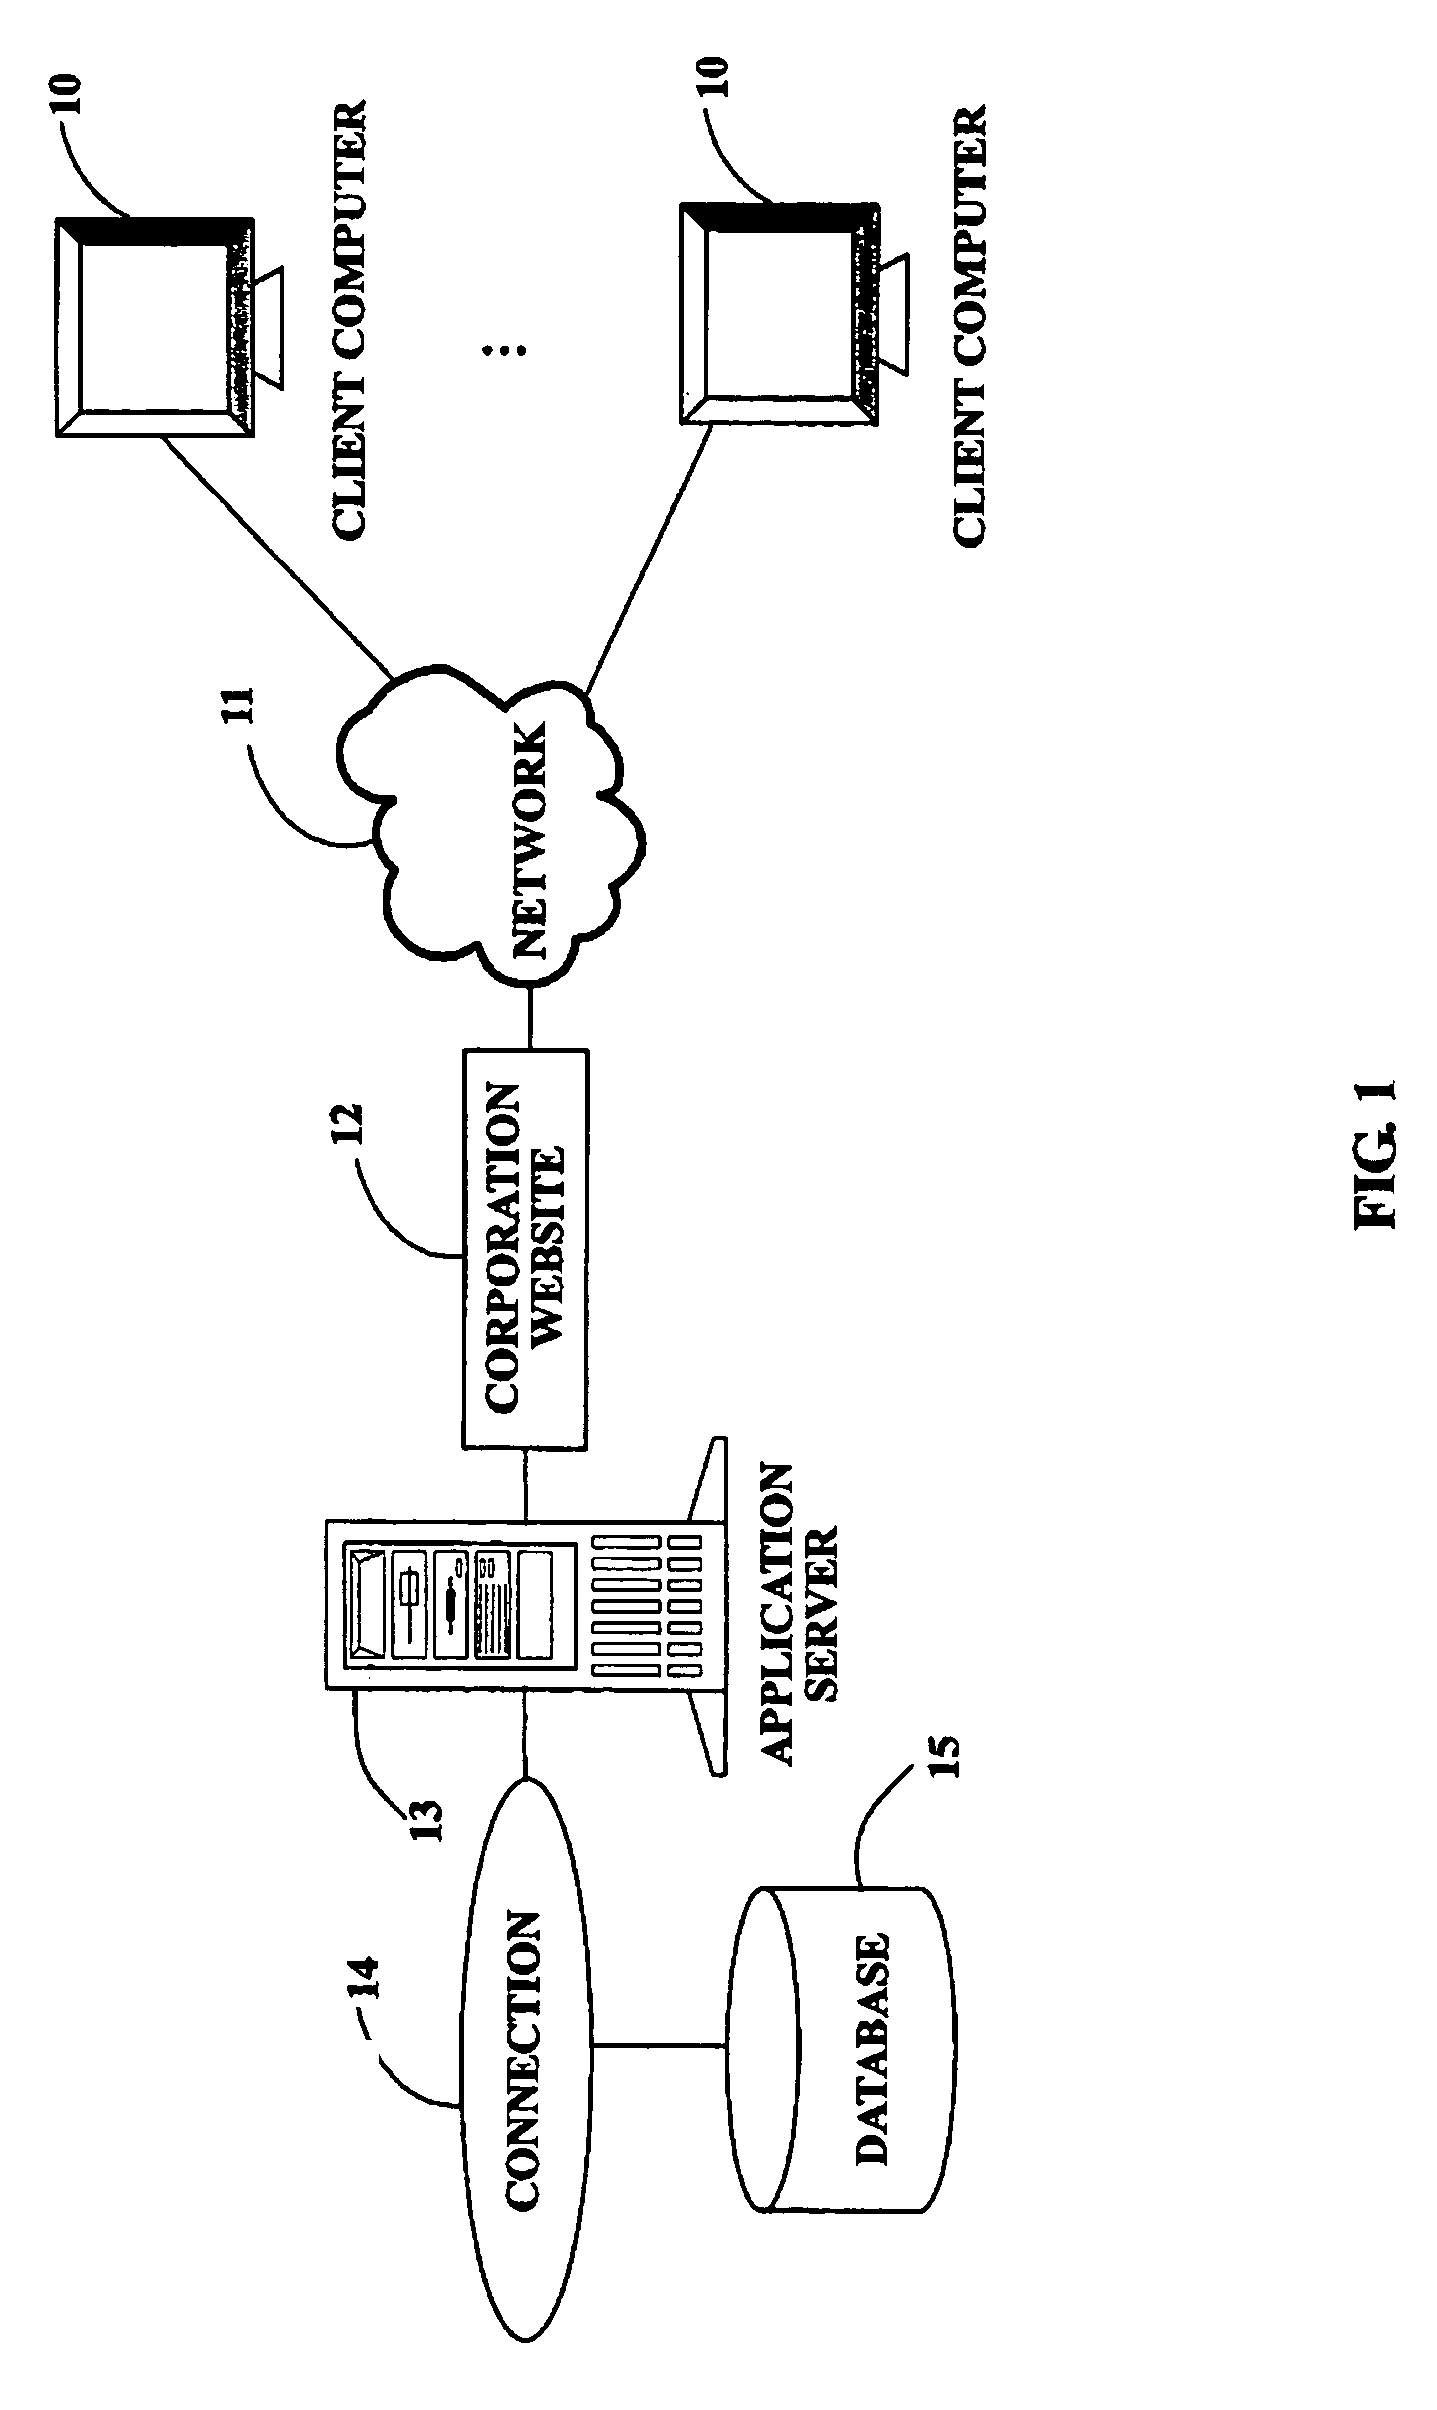 System and method for dynamically controlling attendance of a group of employees